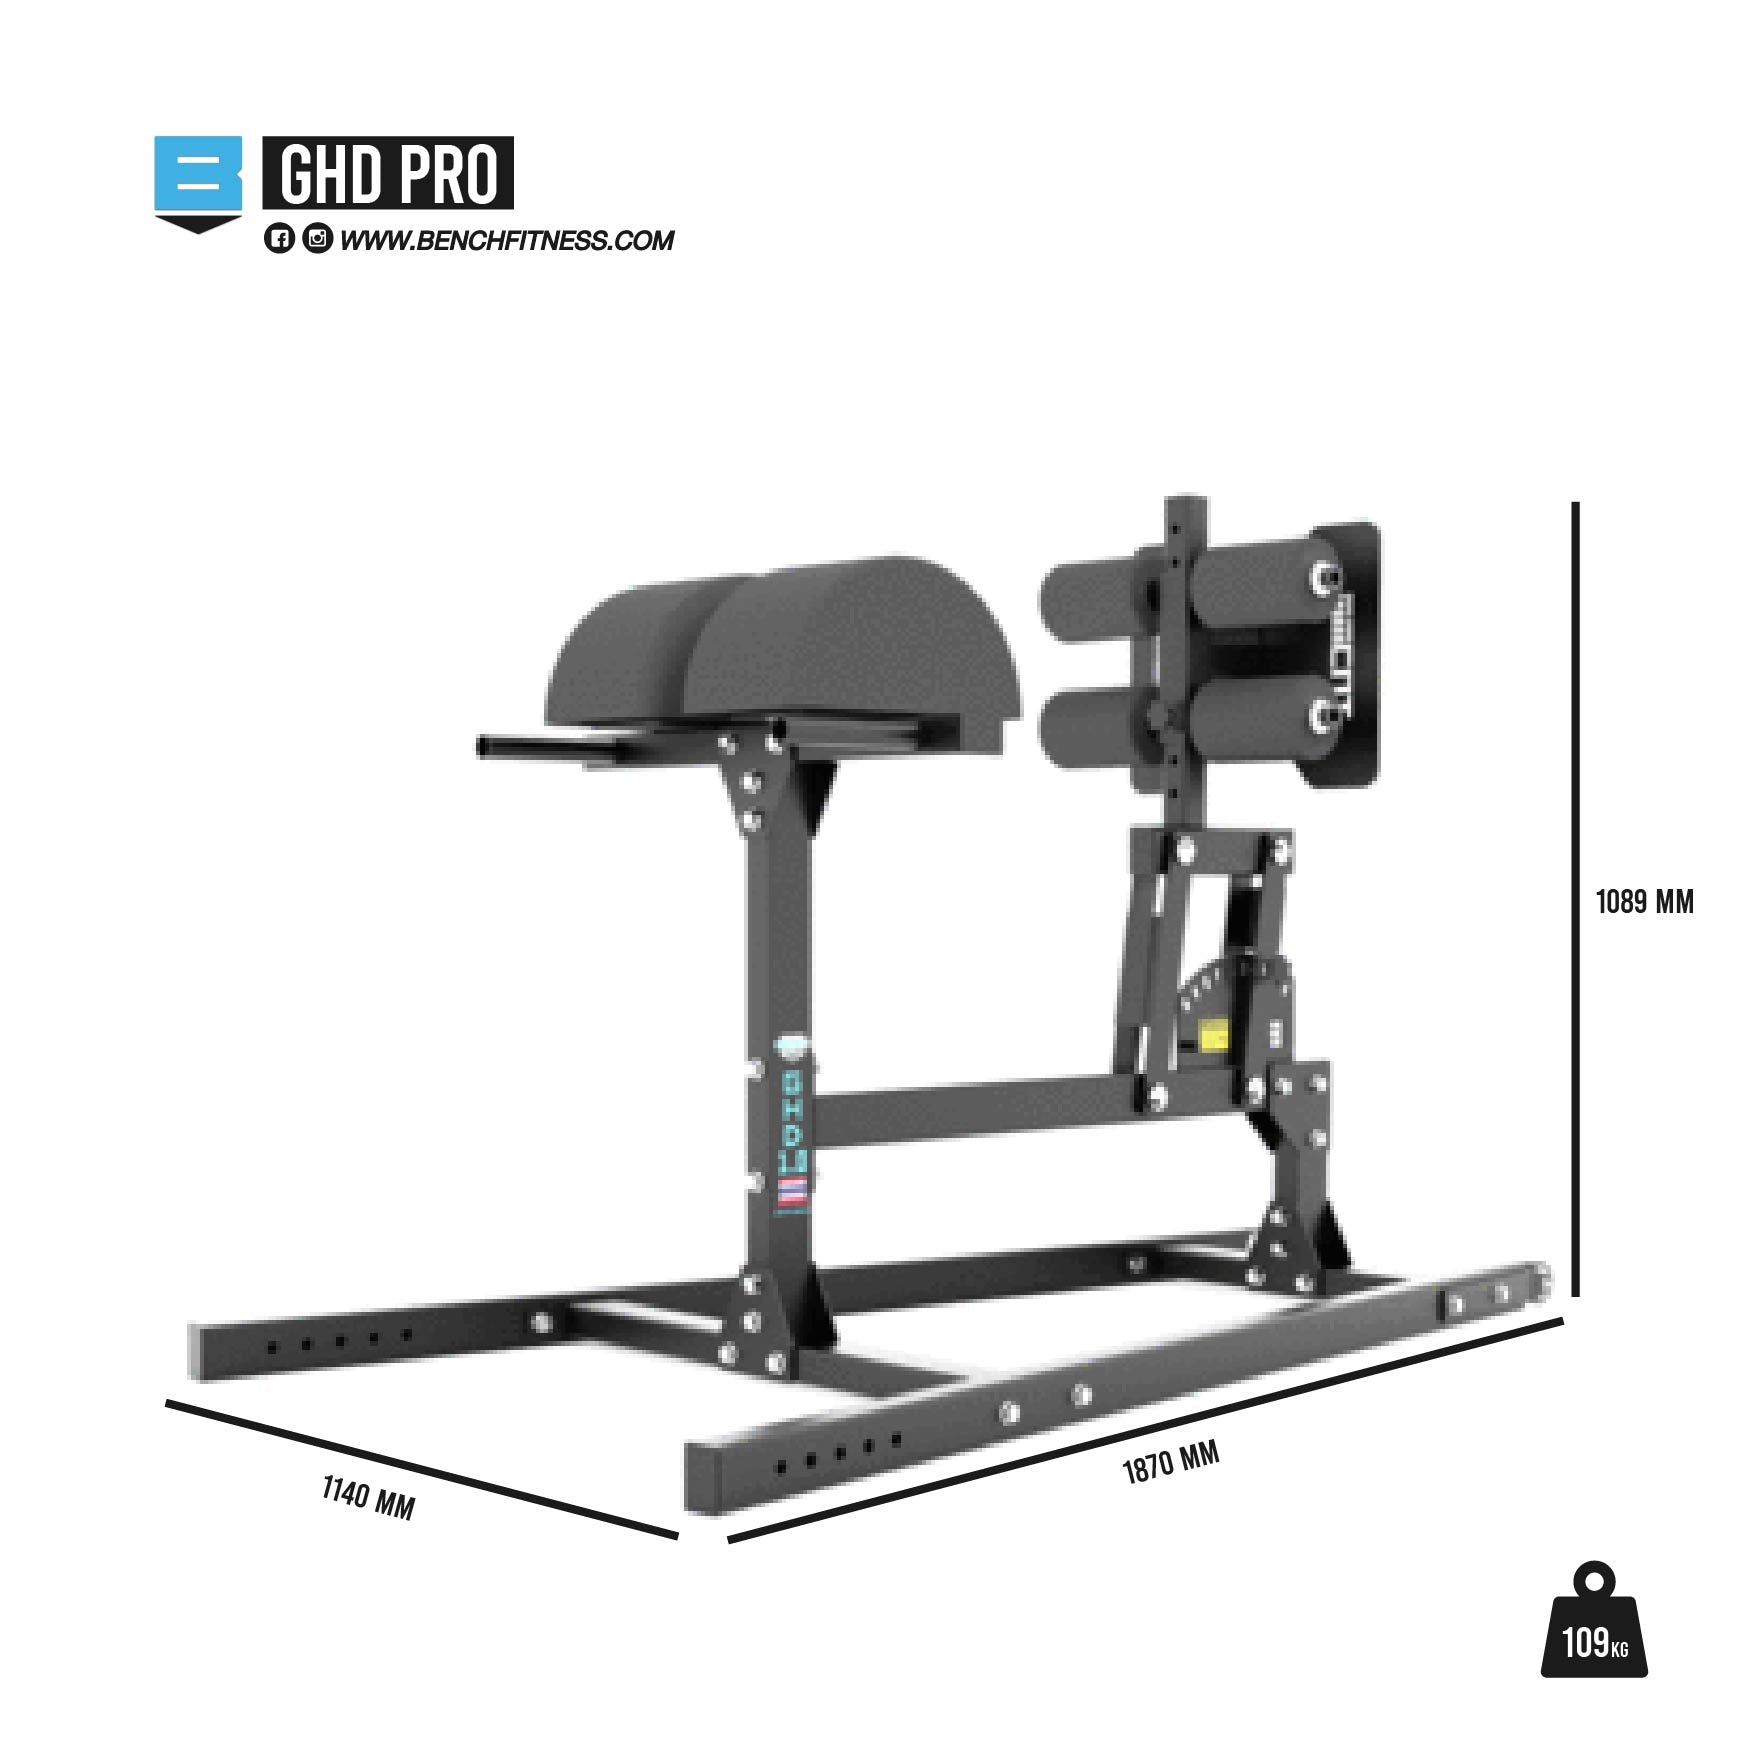 GHD Pro - Bench Fitness Equipment